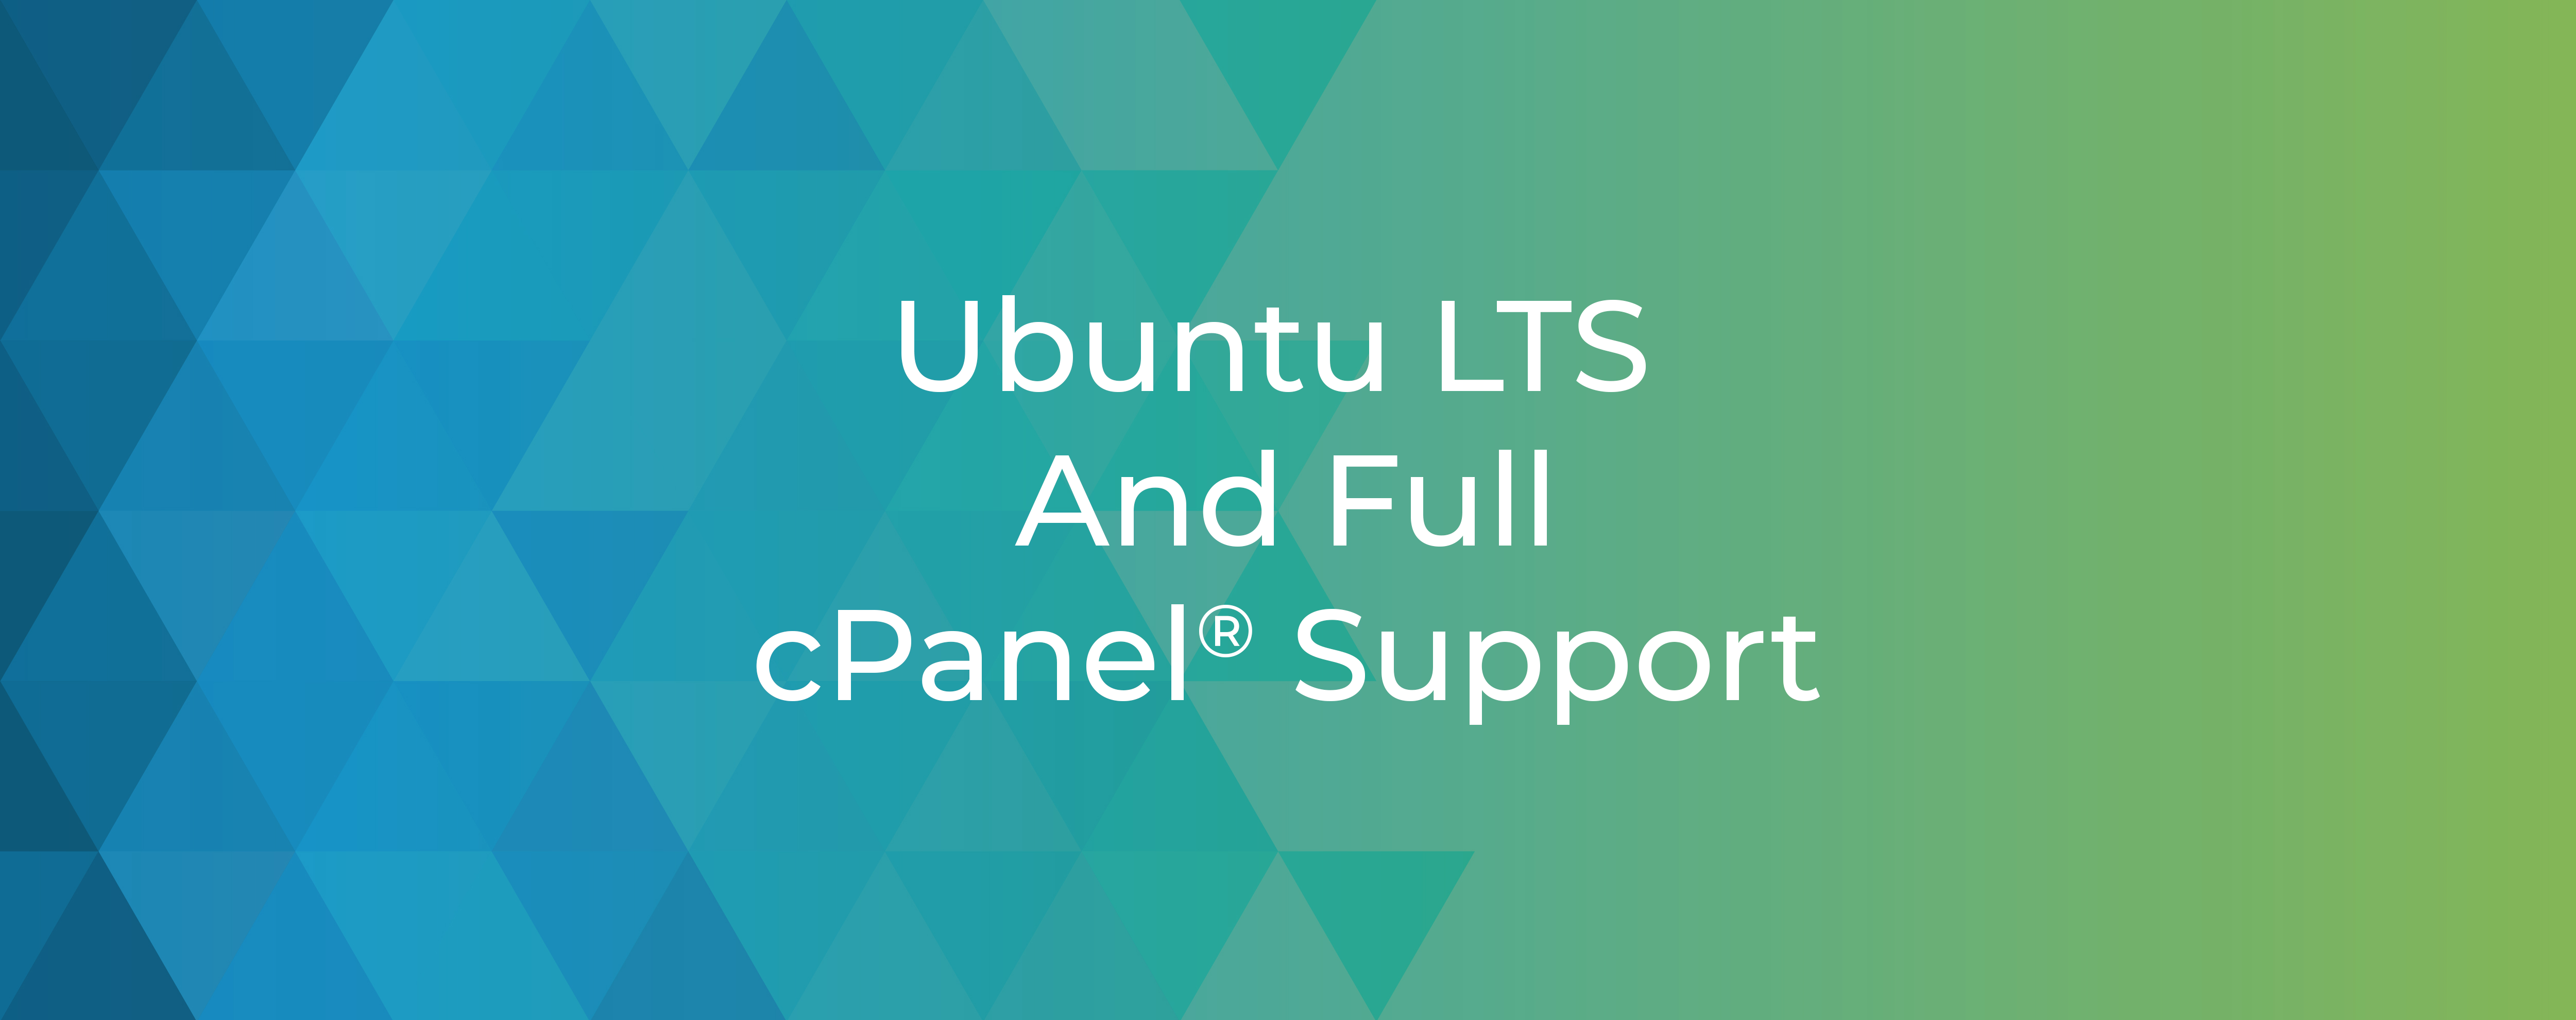 Ubuntu LTS And Full cPanel Support